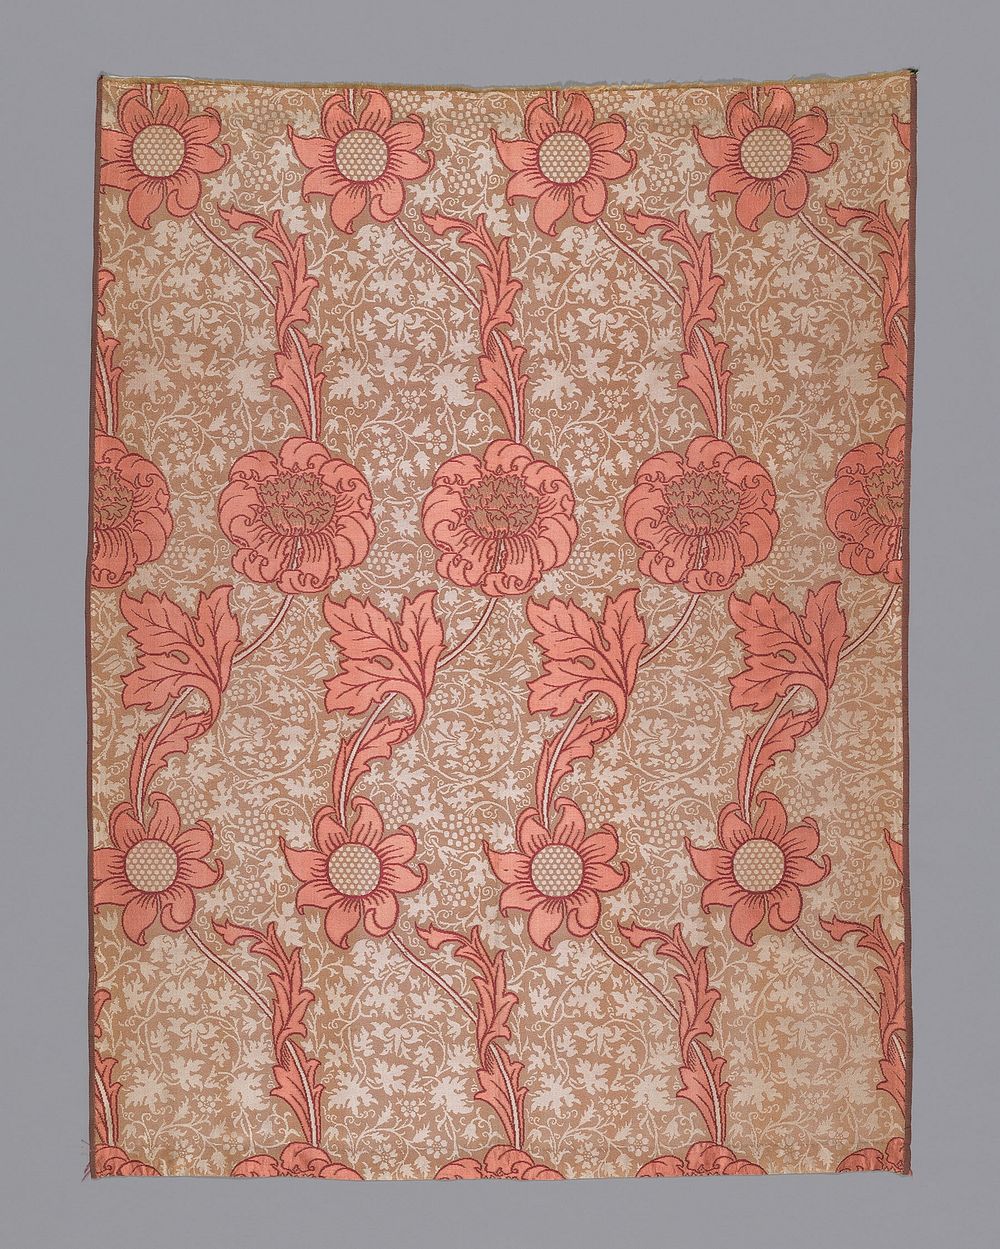 Kennet, Curtain from the Parlor of John J. Glessner House, Chicago by William Morris (Designer)